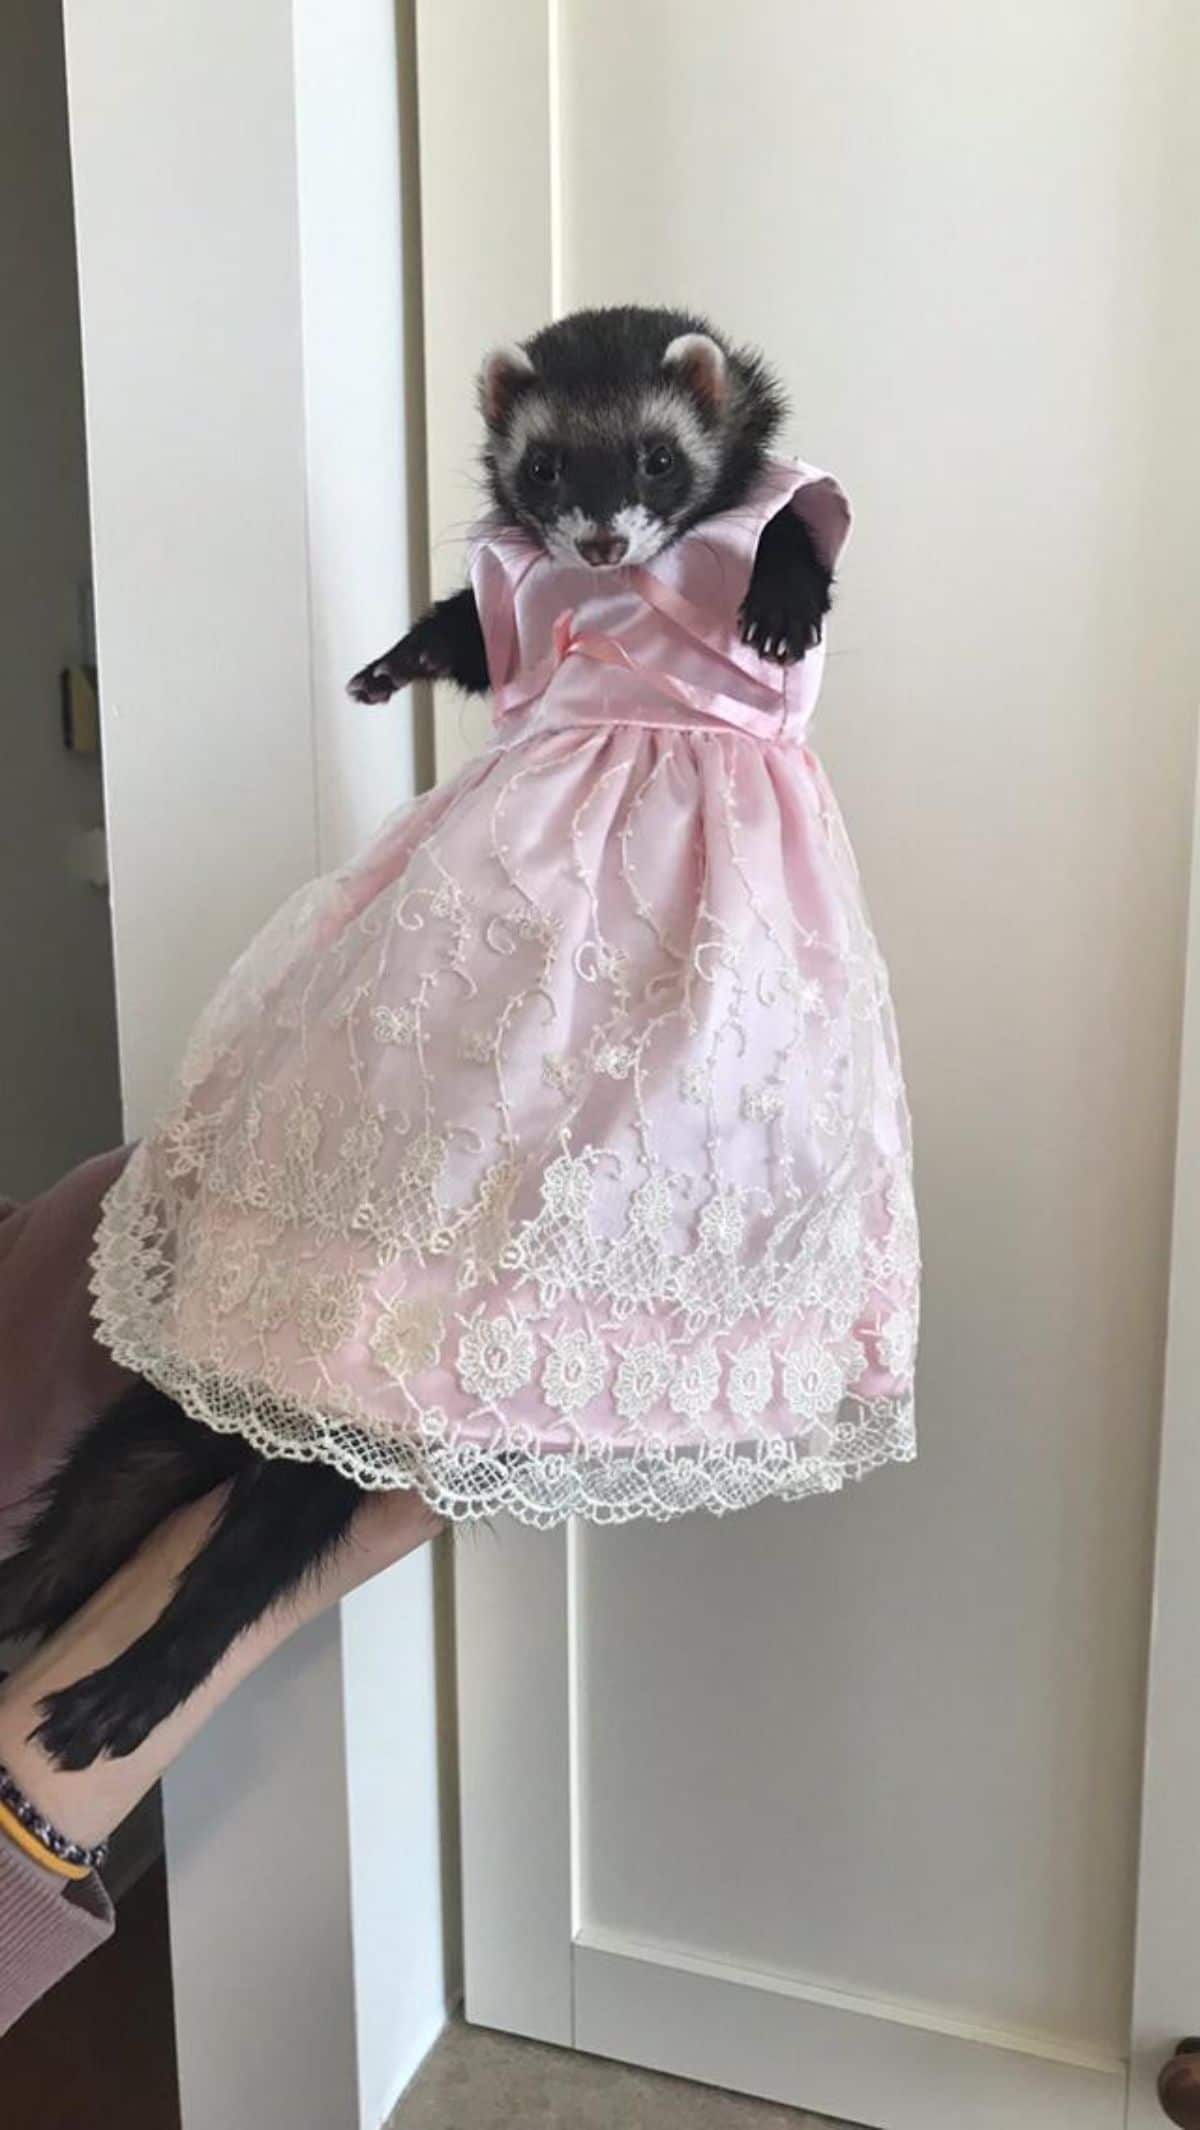 black and white ferret wearing a frilly pink and white dress being held up by someone